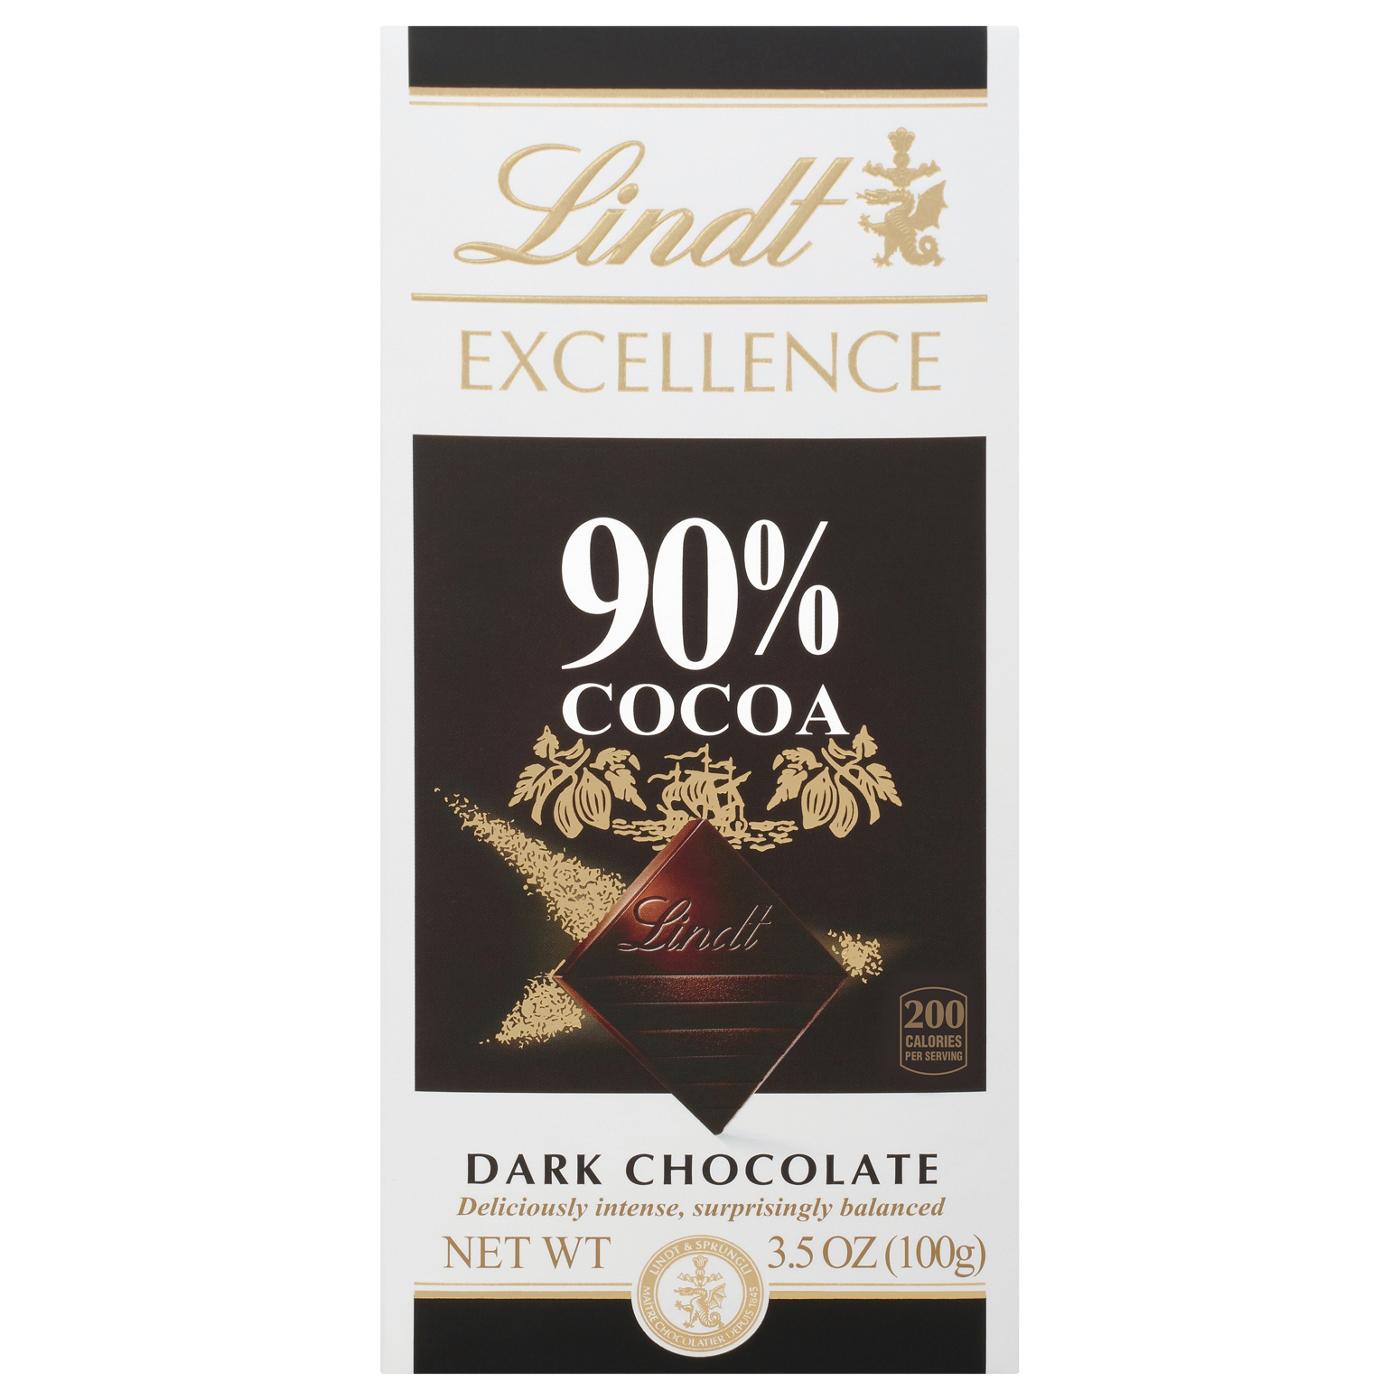 Lindt Excellence 90% Cocoa Dark Chocolate Bar; image 1 of 2